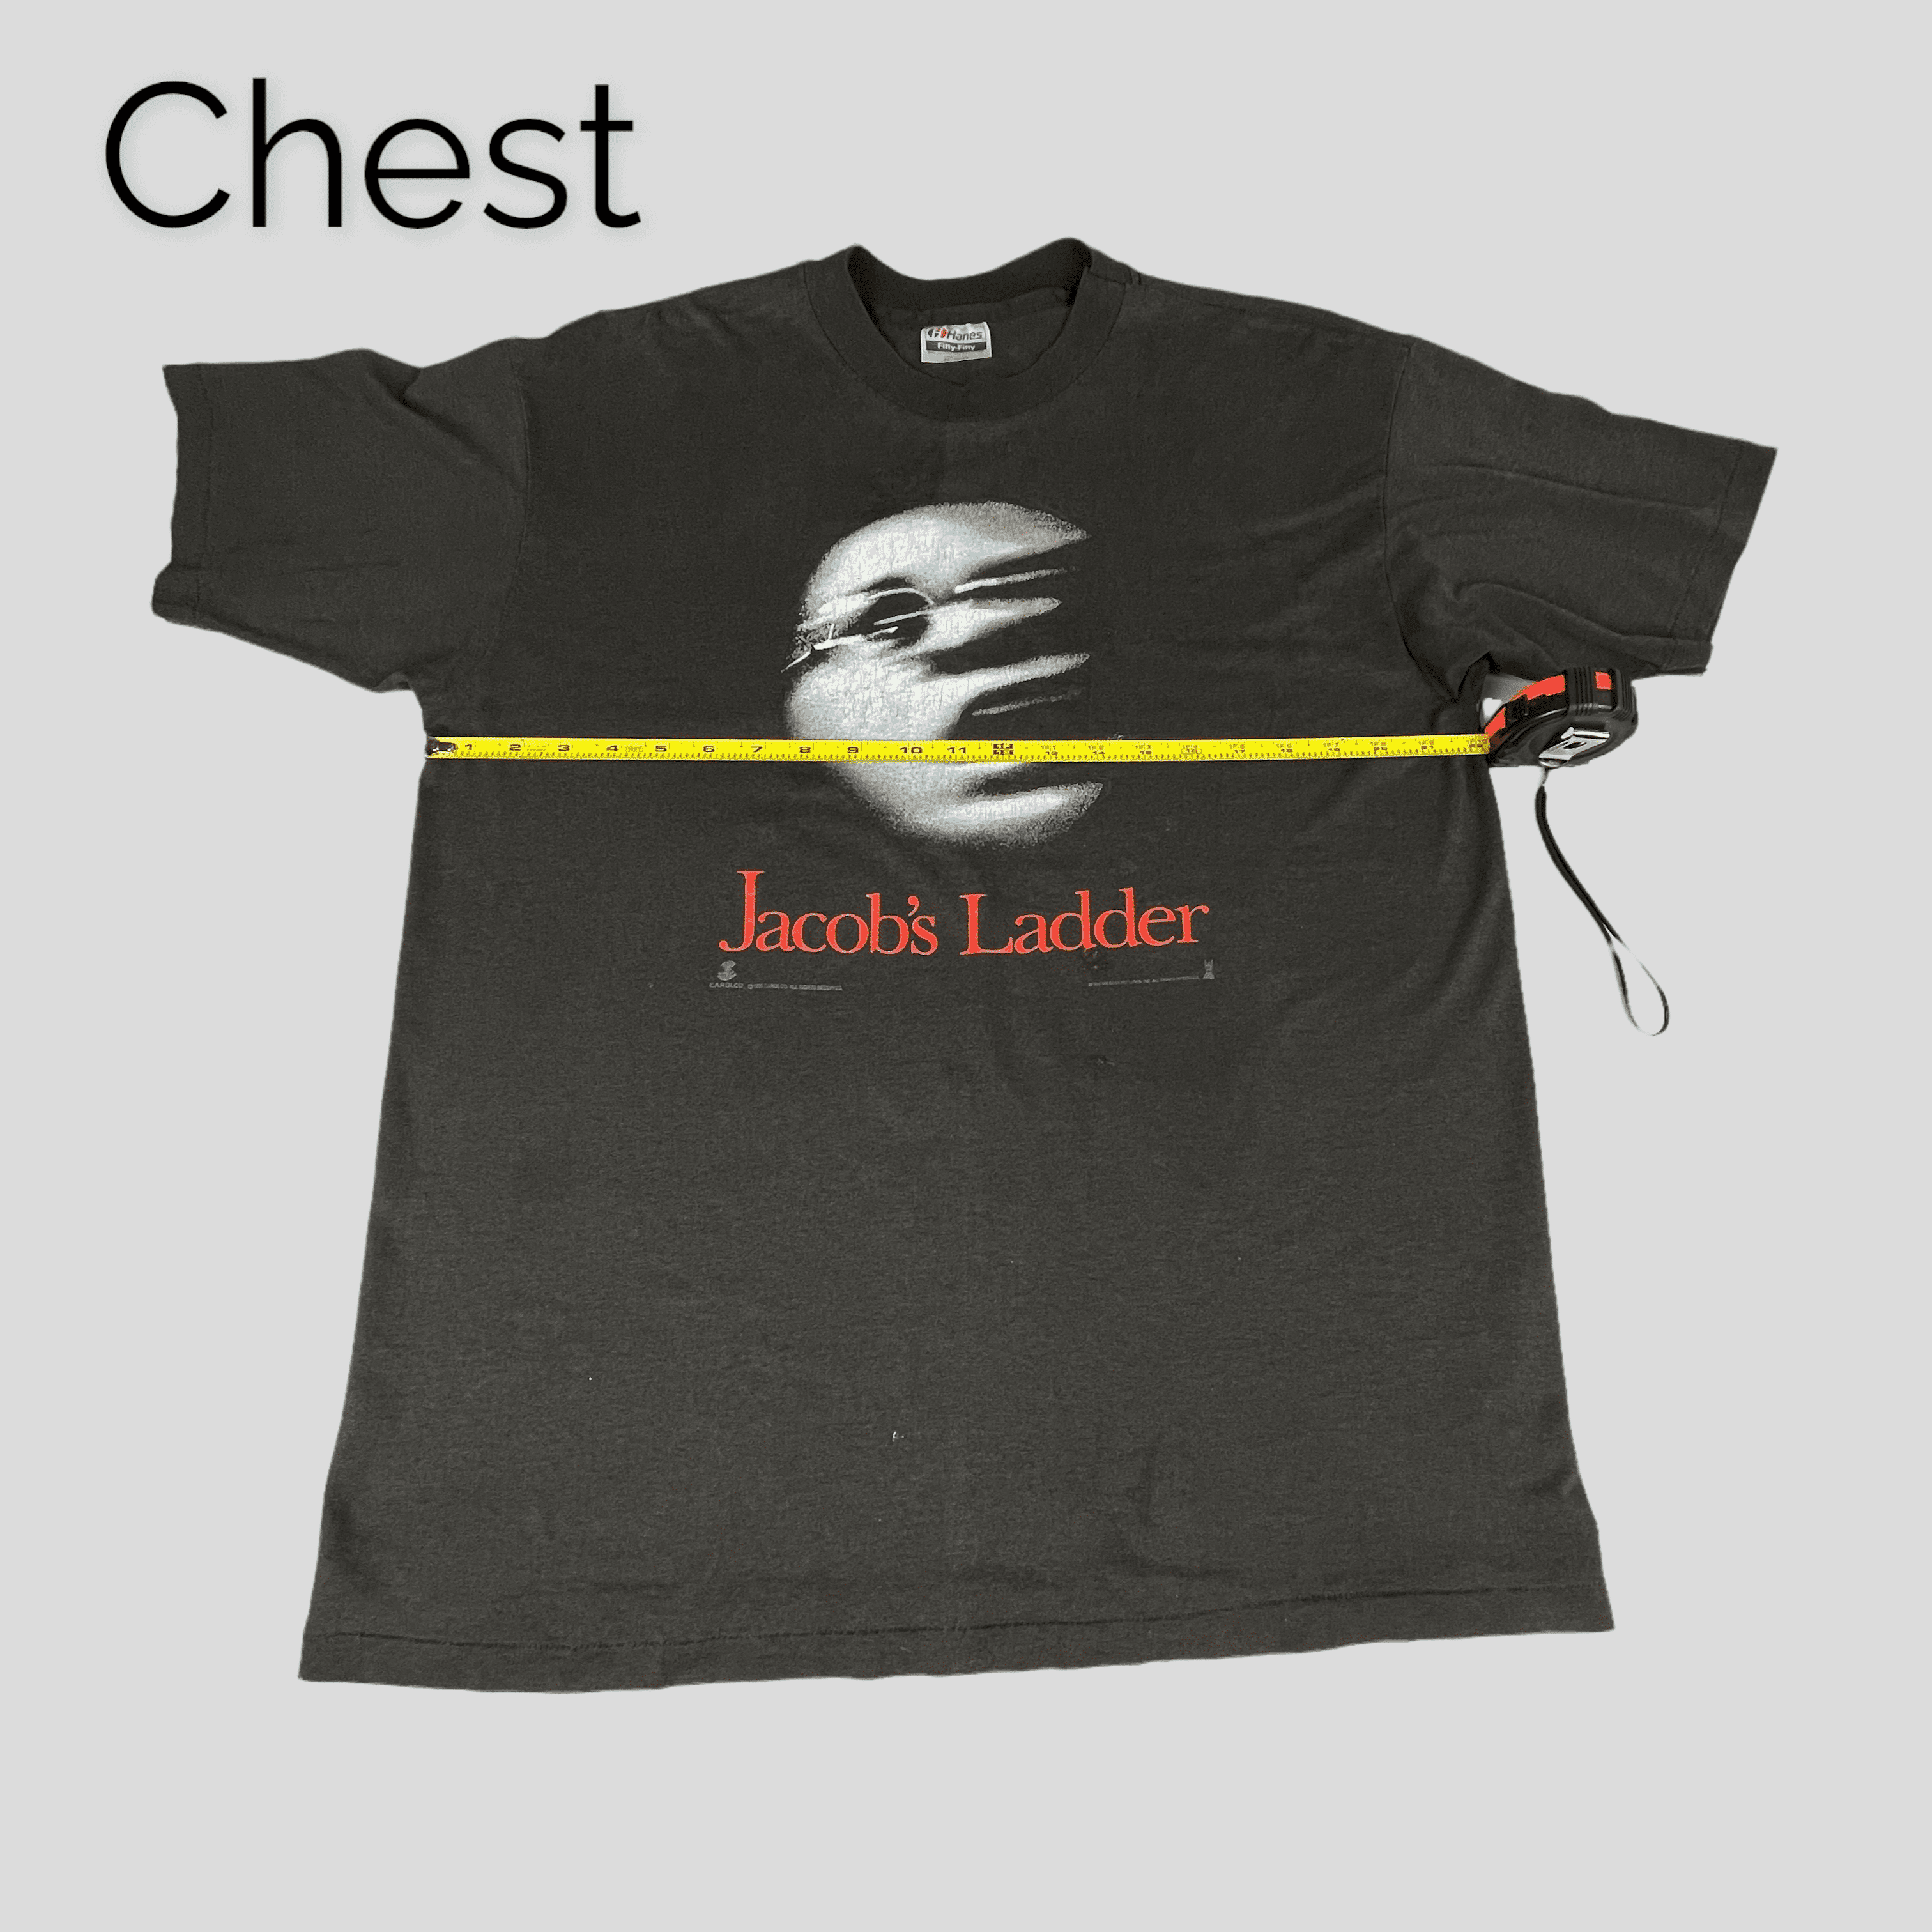 Chest Measurement - How To Measure A T-Shirt